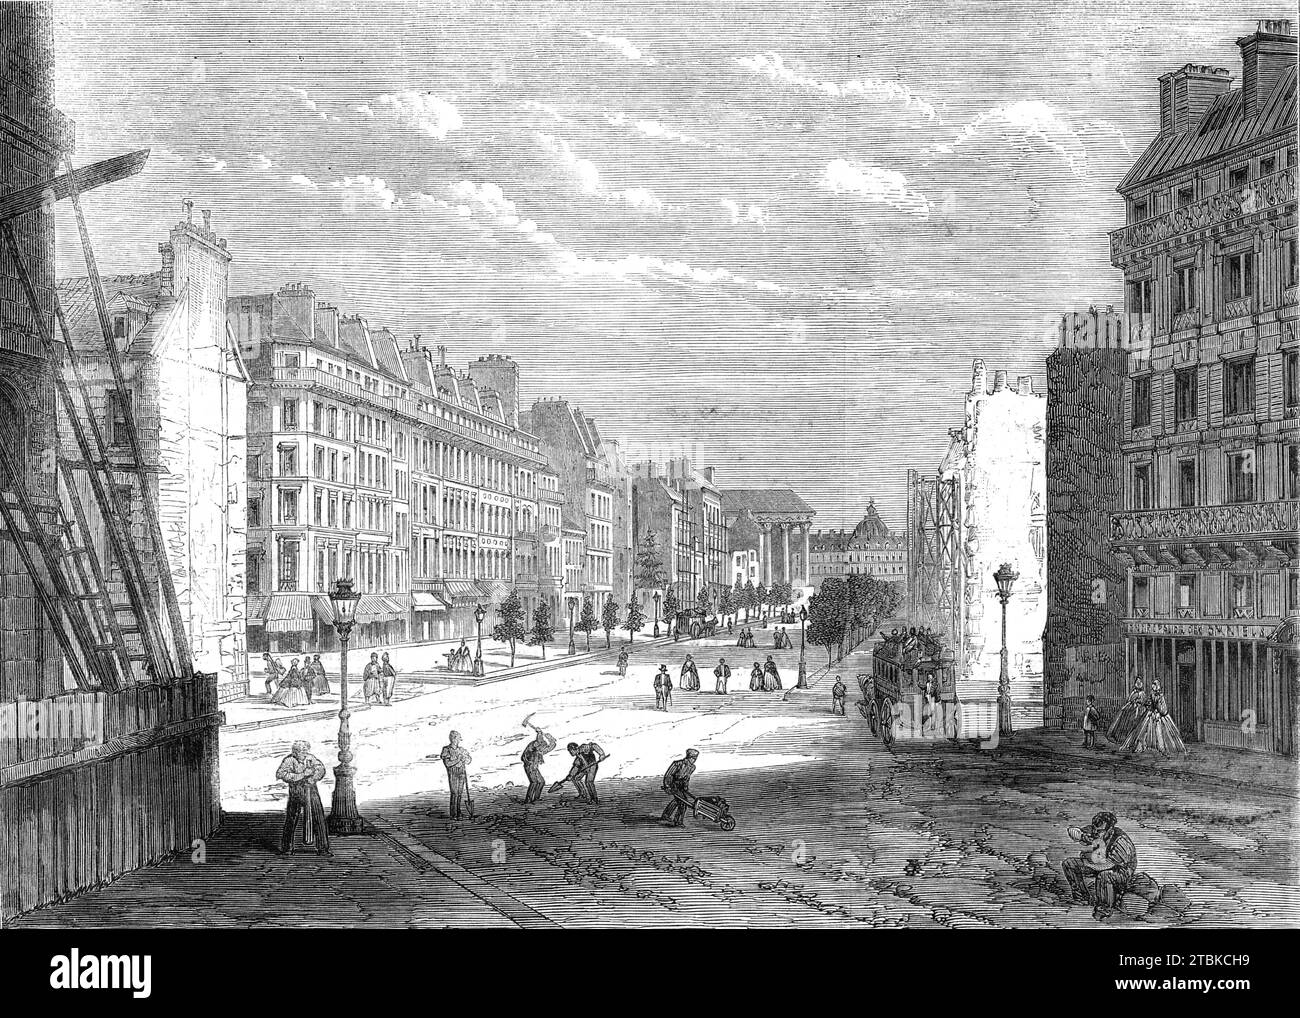 New Boulevard Malesherbes, looking towards the Madeleine, [Paris], 1861. '...the construction of the Boulevard Malesherbes has led to the disappearance of La Petite Pologne, a small district possessing an unenviable notoriety for the bad reputation of its inhabitants, who were an eyesore to the &quot;West-end&quot; of the French capital...Henceforth Paris will be purged of these infectious neighbourhoods...Our View of the new Boulevard is taken from the point where it forms an angle with the Madeleine...at one extremity and the Arc de Triomphe at the other. The angle itself is to be occupied b Stock Photo